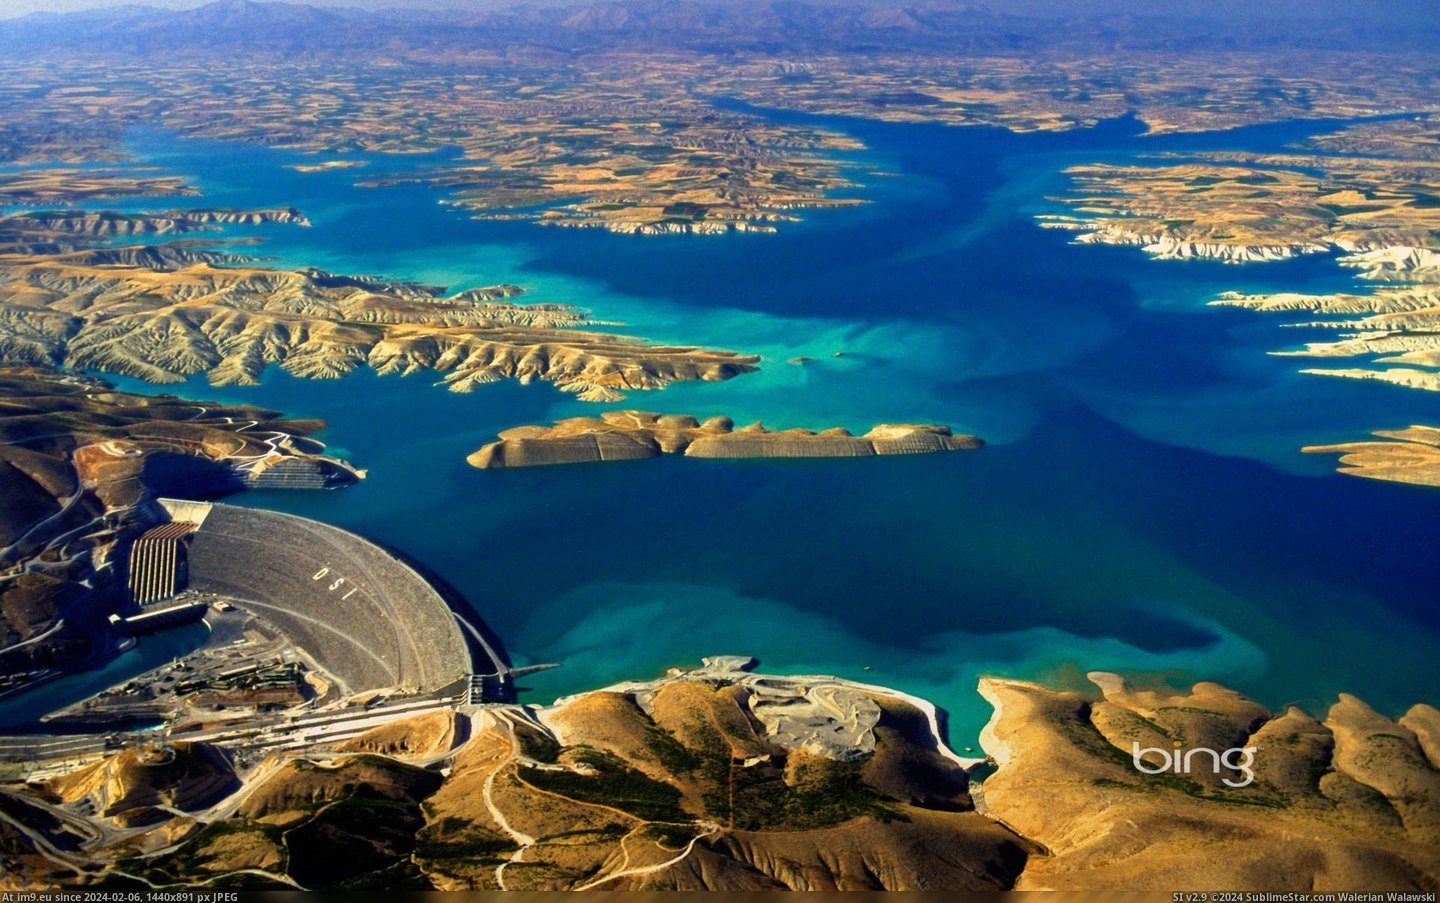 Aerial view of the Atatürk Dam on the Euphrates River, Turkey (Corbis) 2013-03-18 (in Best photos of March 2013)